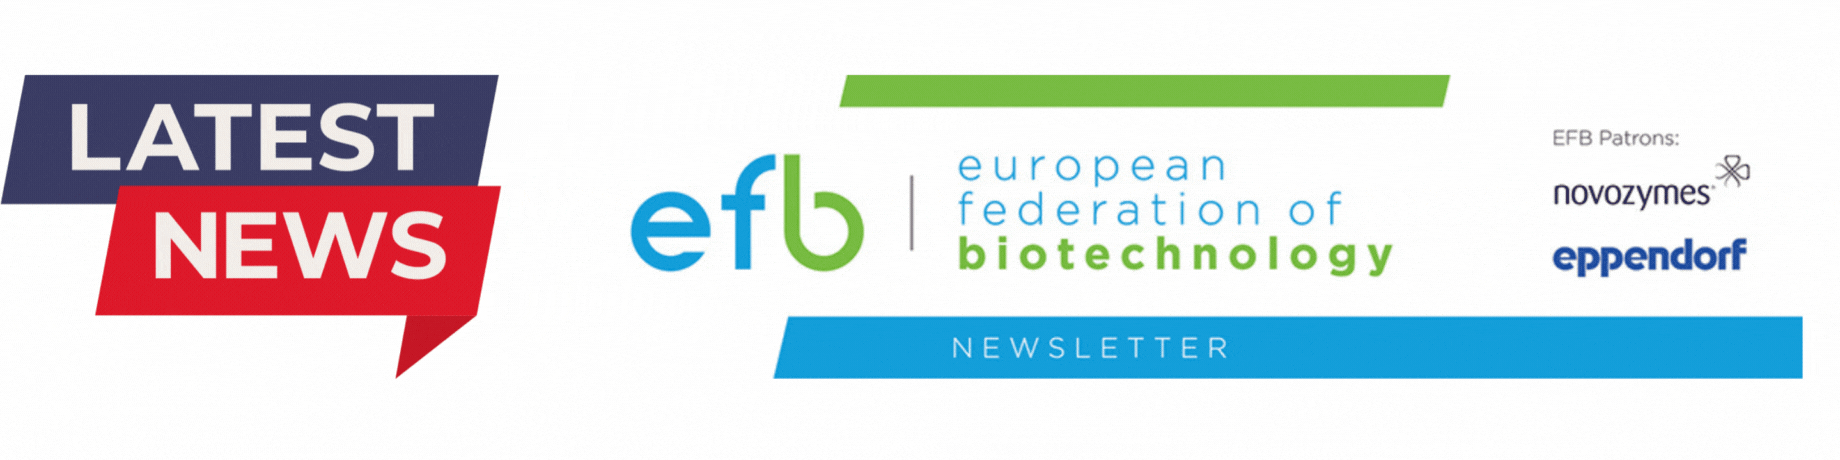 Newsletter- Biotechnology conference